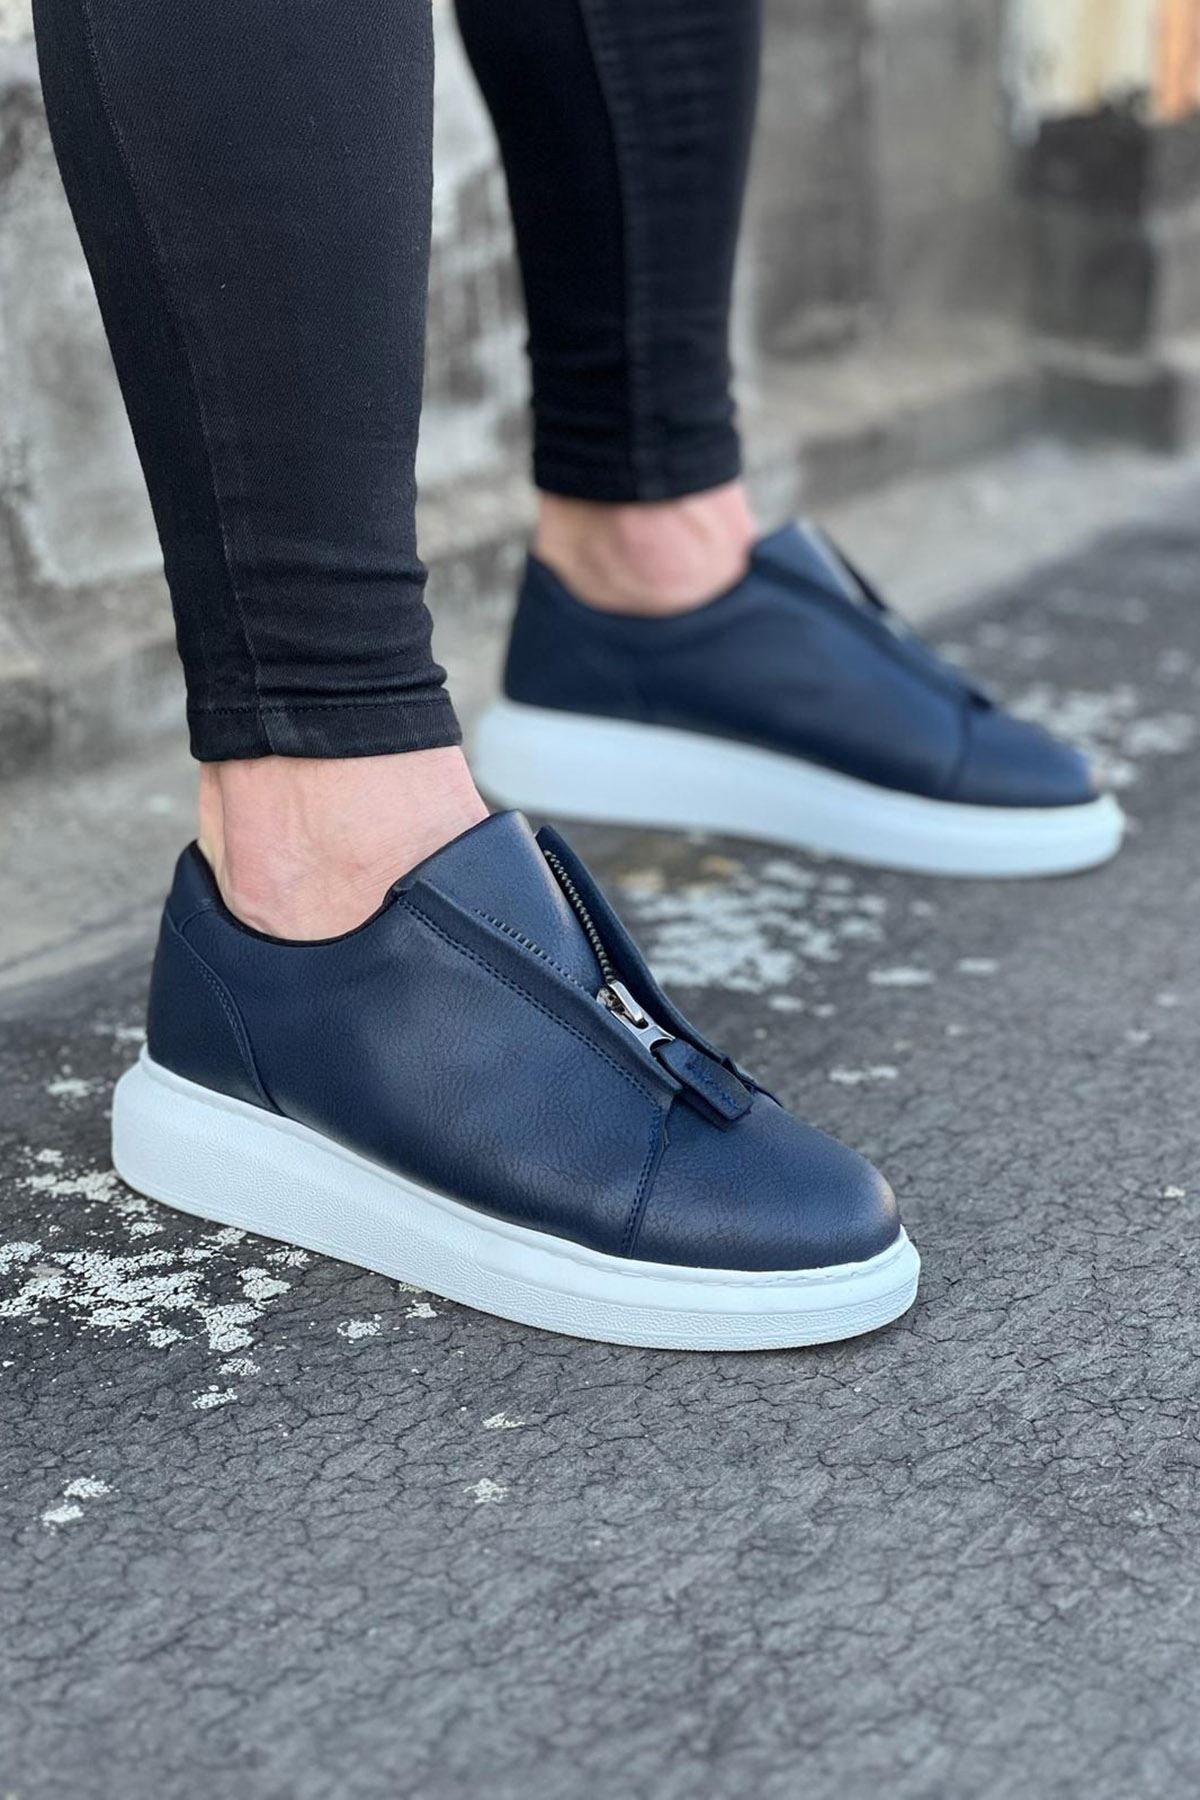 WG010 Navy Blue Skin Men's Casual Shoes - STREETMODE ™